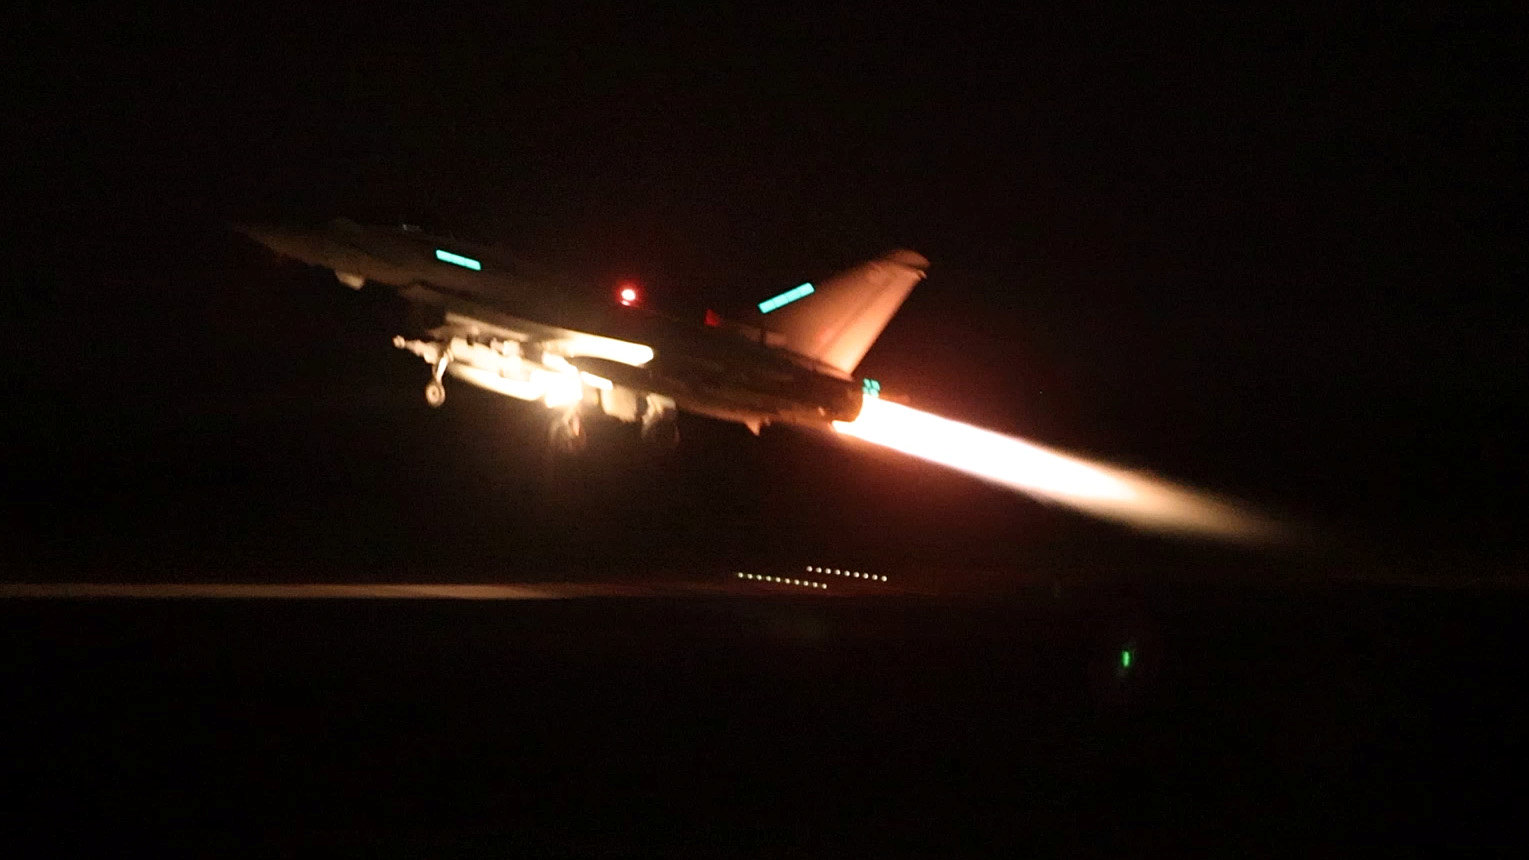 An RAF Typhoon aircraft - like the one in operation last night - takes off to conduct air strikes against military targets in Yemen earlier this year